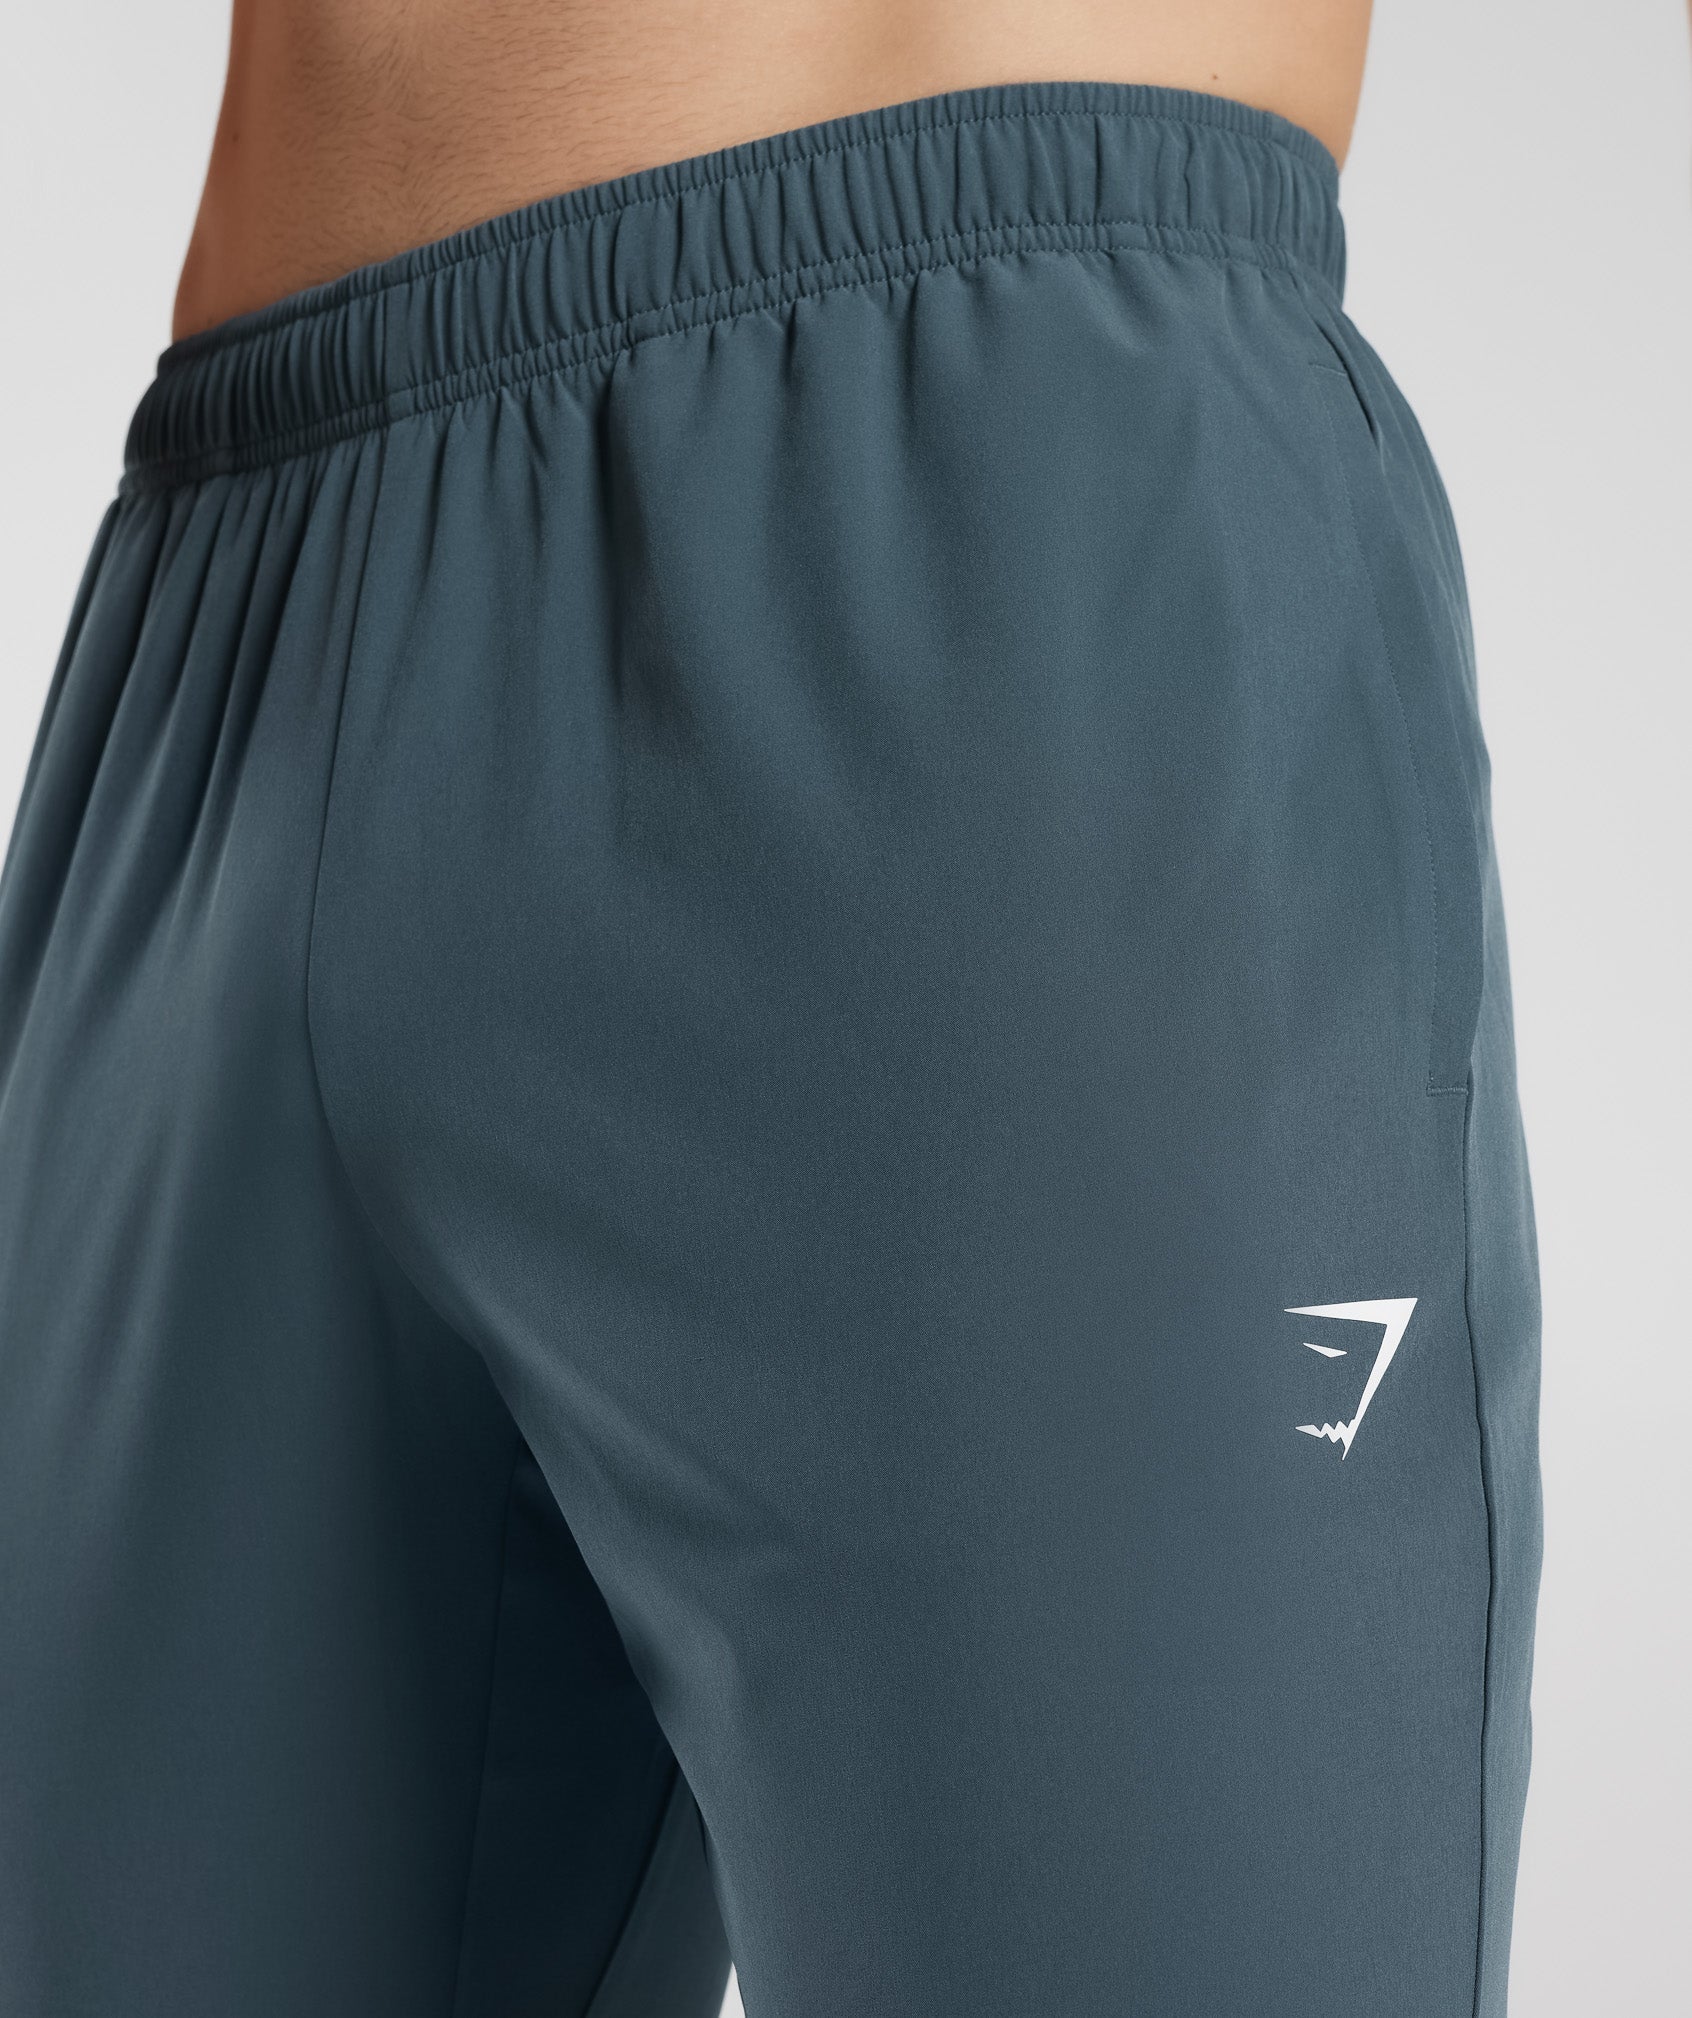 Arrival Jogger in Smokey Teal - view 3